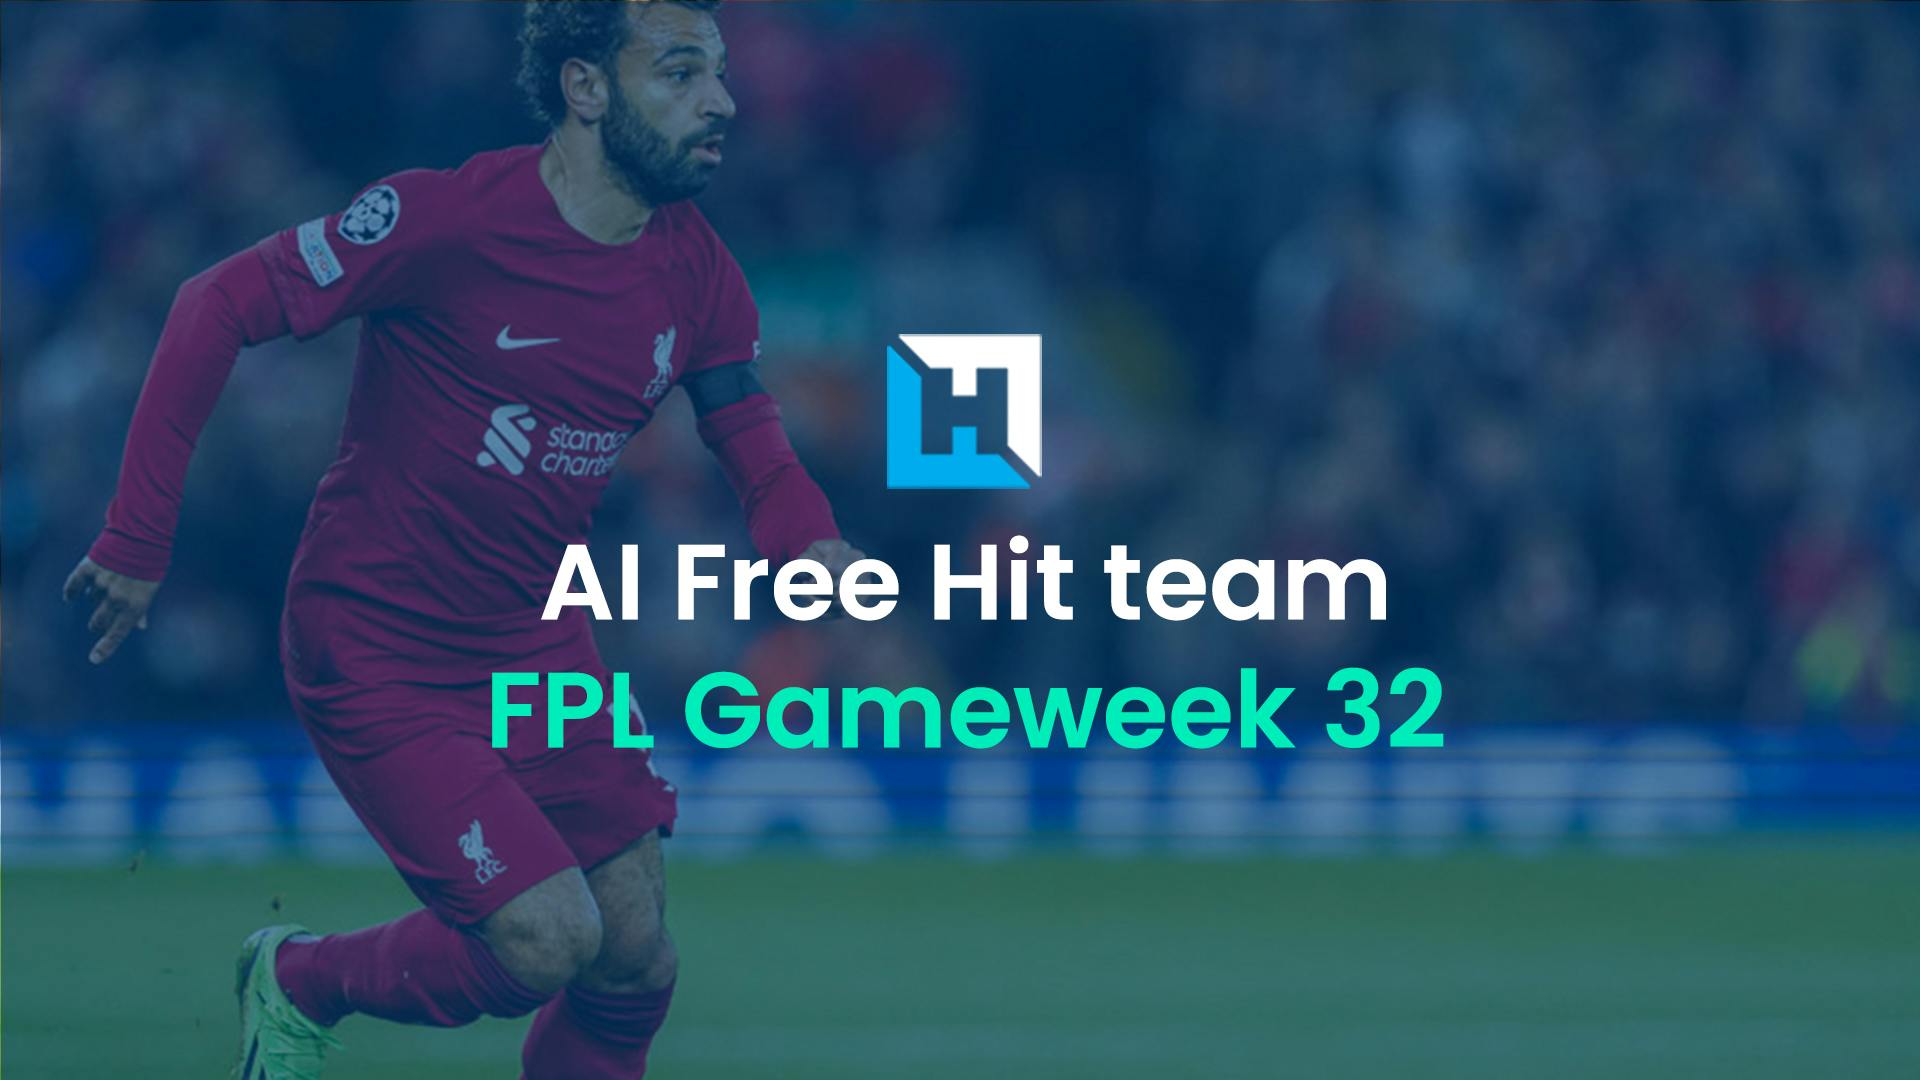 What is the best FPL Free Hit team for Blank Gameweek 32 according to AI?